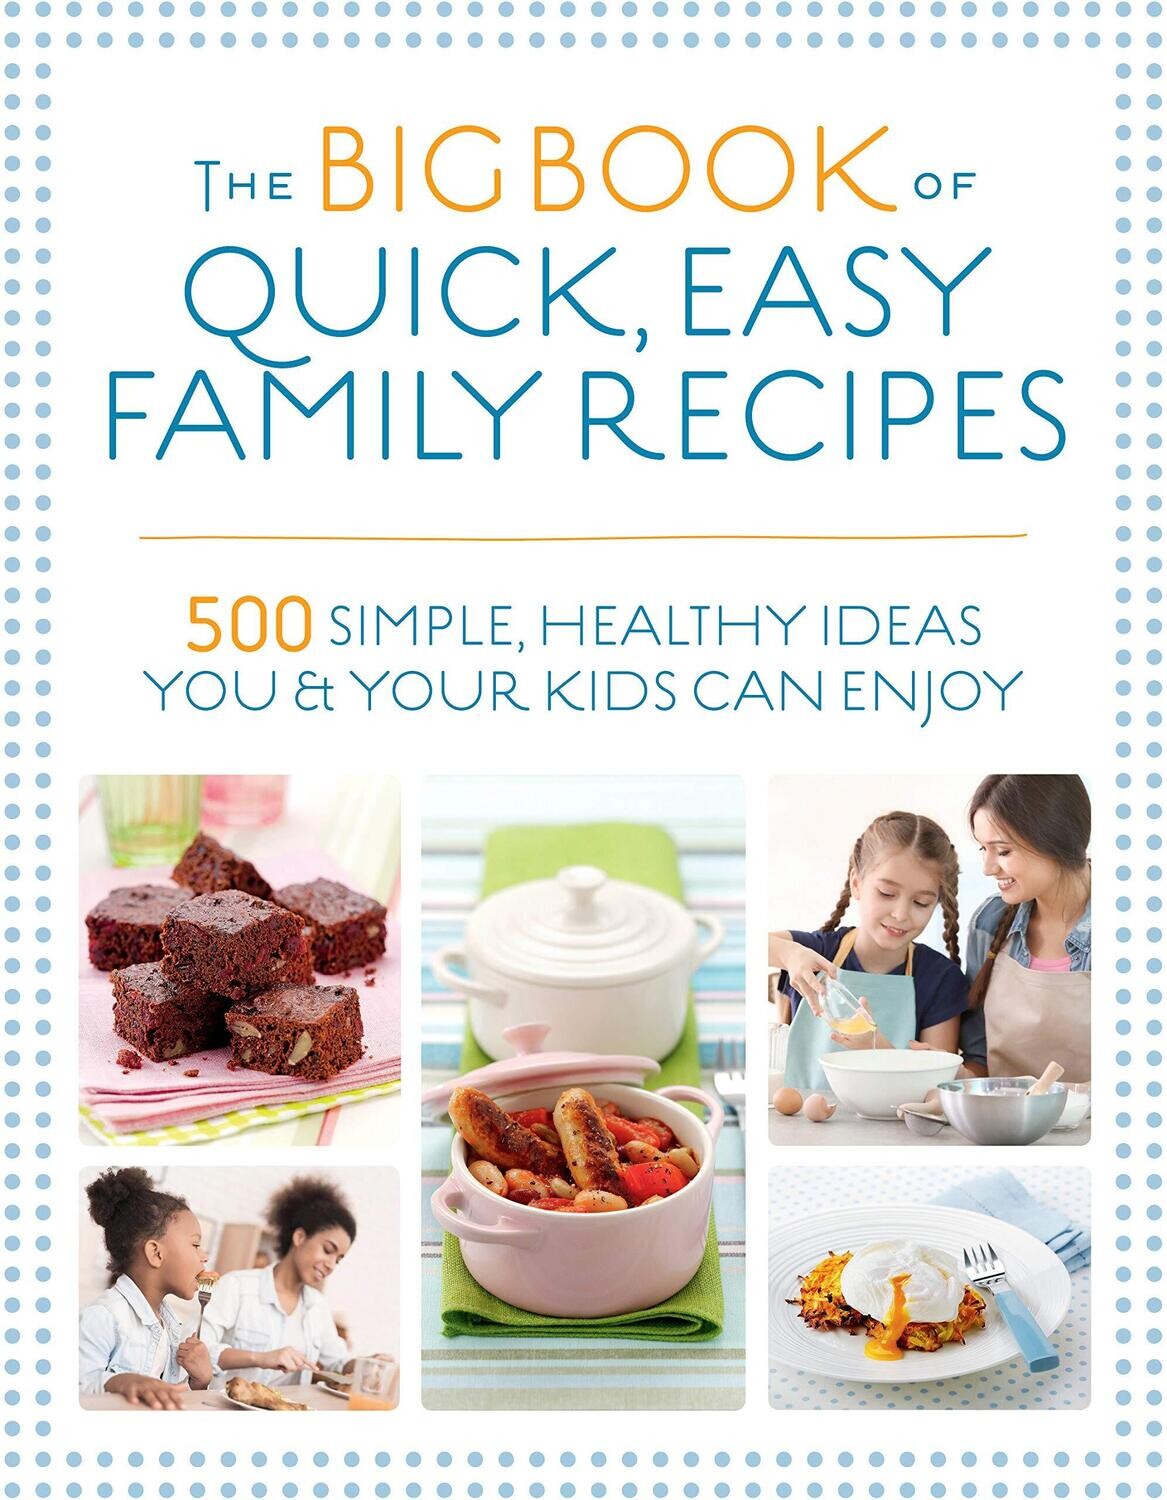 THE Big Book Of Quick easy Family Recipes